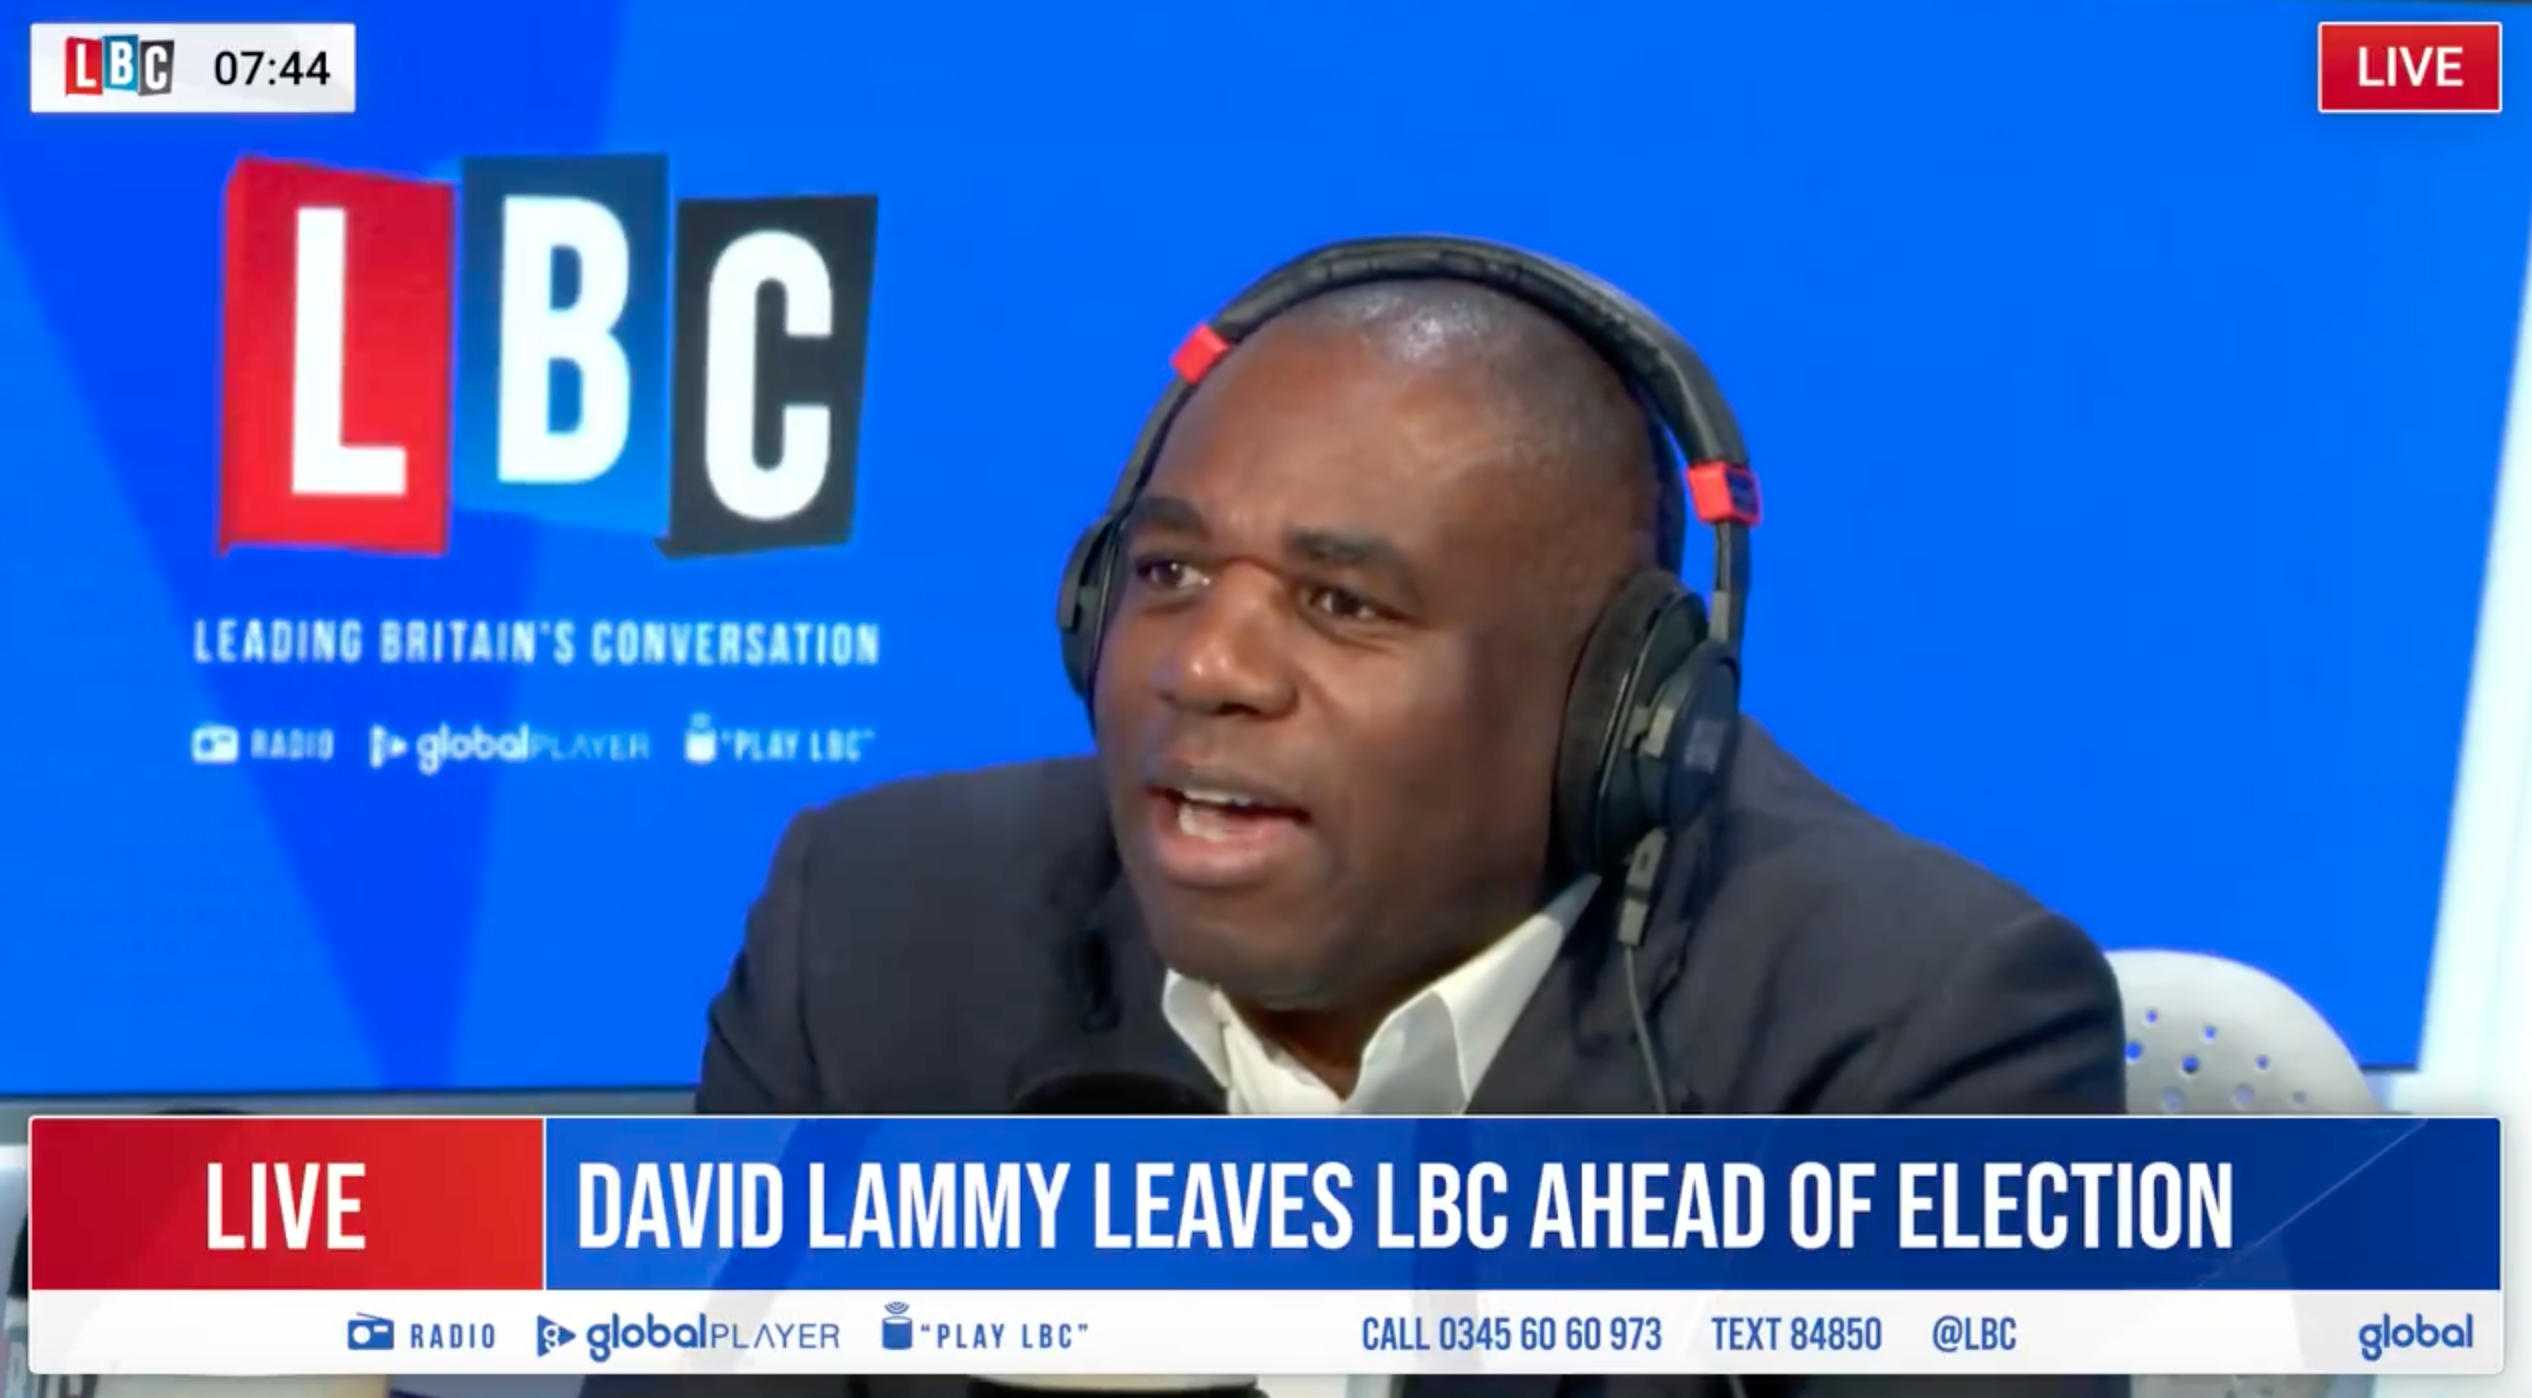 Shadow Secretary David Lammy Quits LBC Show Ahead Of Election, Replaced By Lewis Goodall [Video]